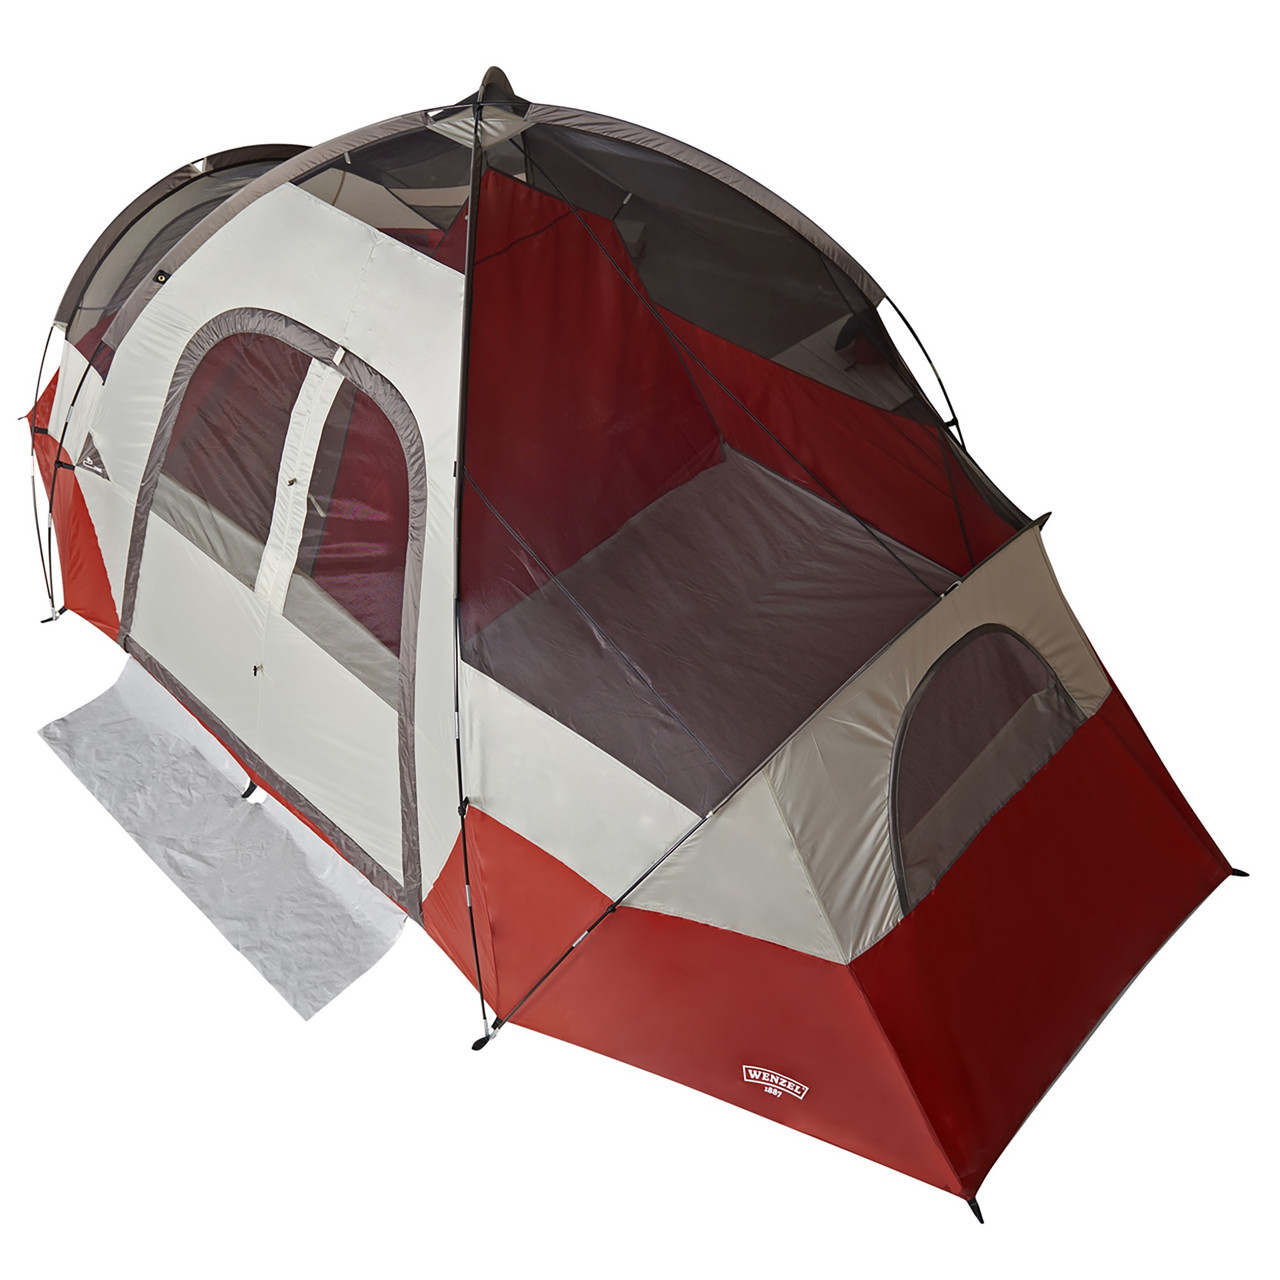 Wenzel Bristlecone 8 Person Dome Tent, red/white, top view, fly off